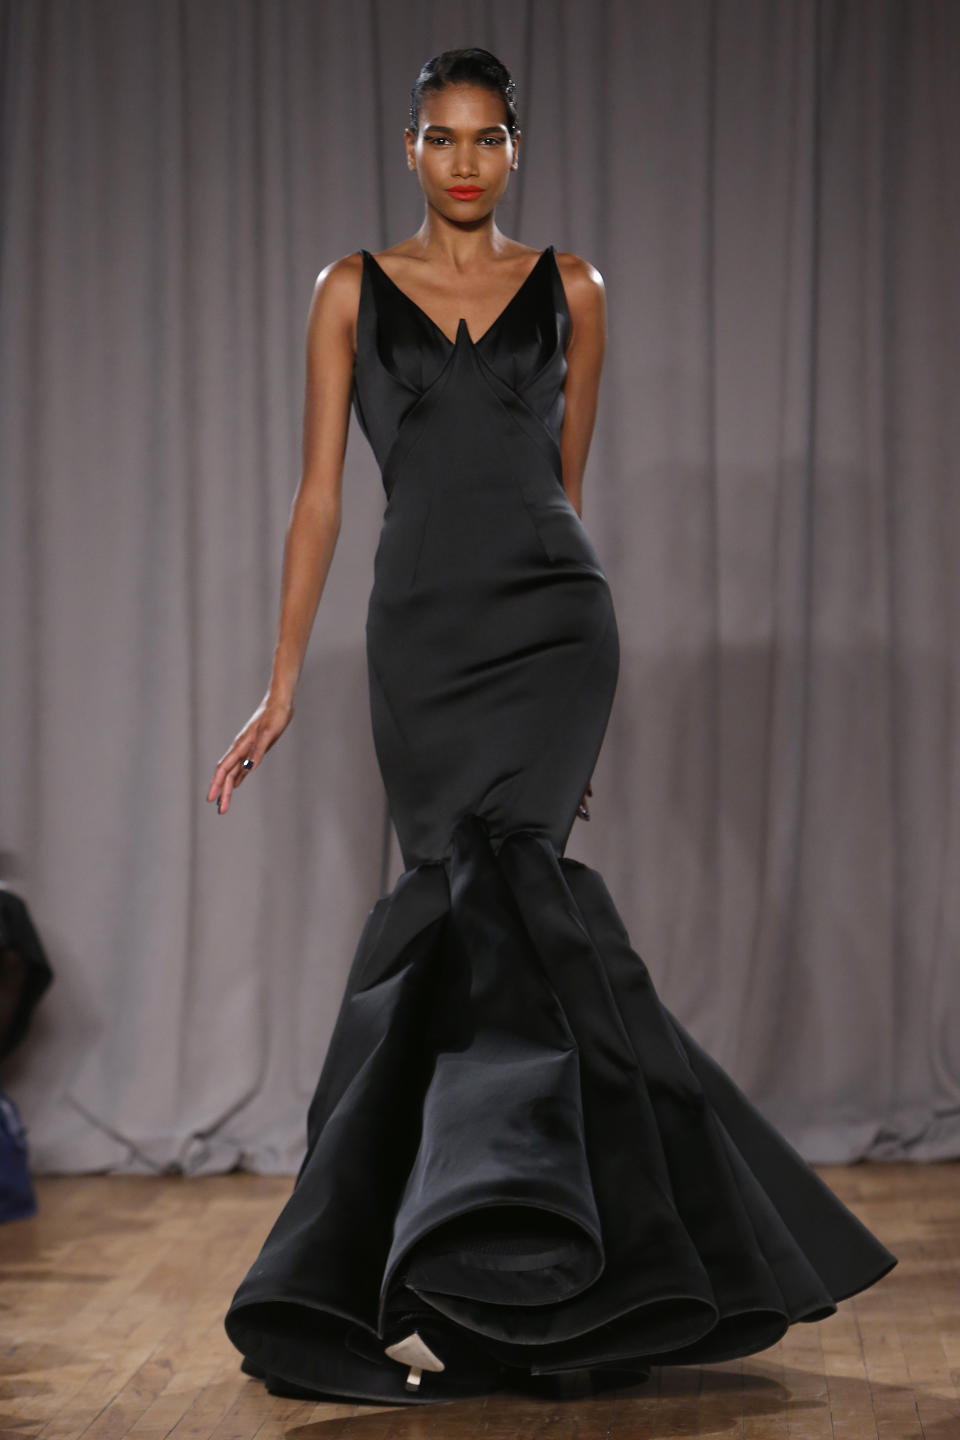 The Zac Posen Fall 2014 collection is modeled during Fashion Week in New York, Monday, Feb. 10, 2014. (AP Photo/Jason DeCrow)